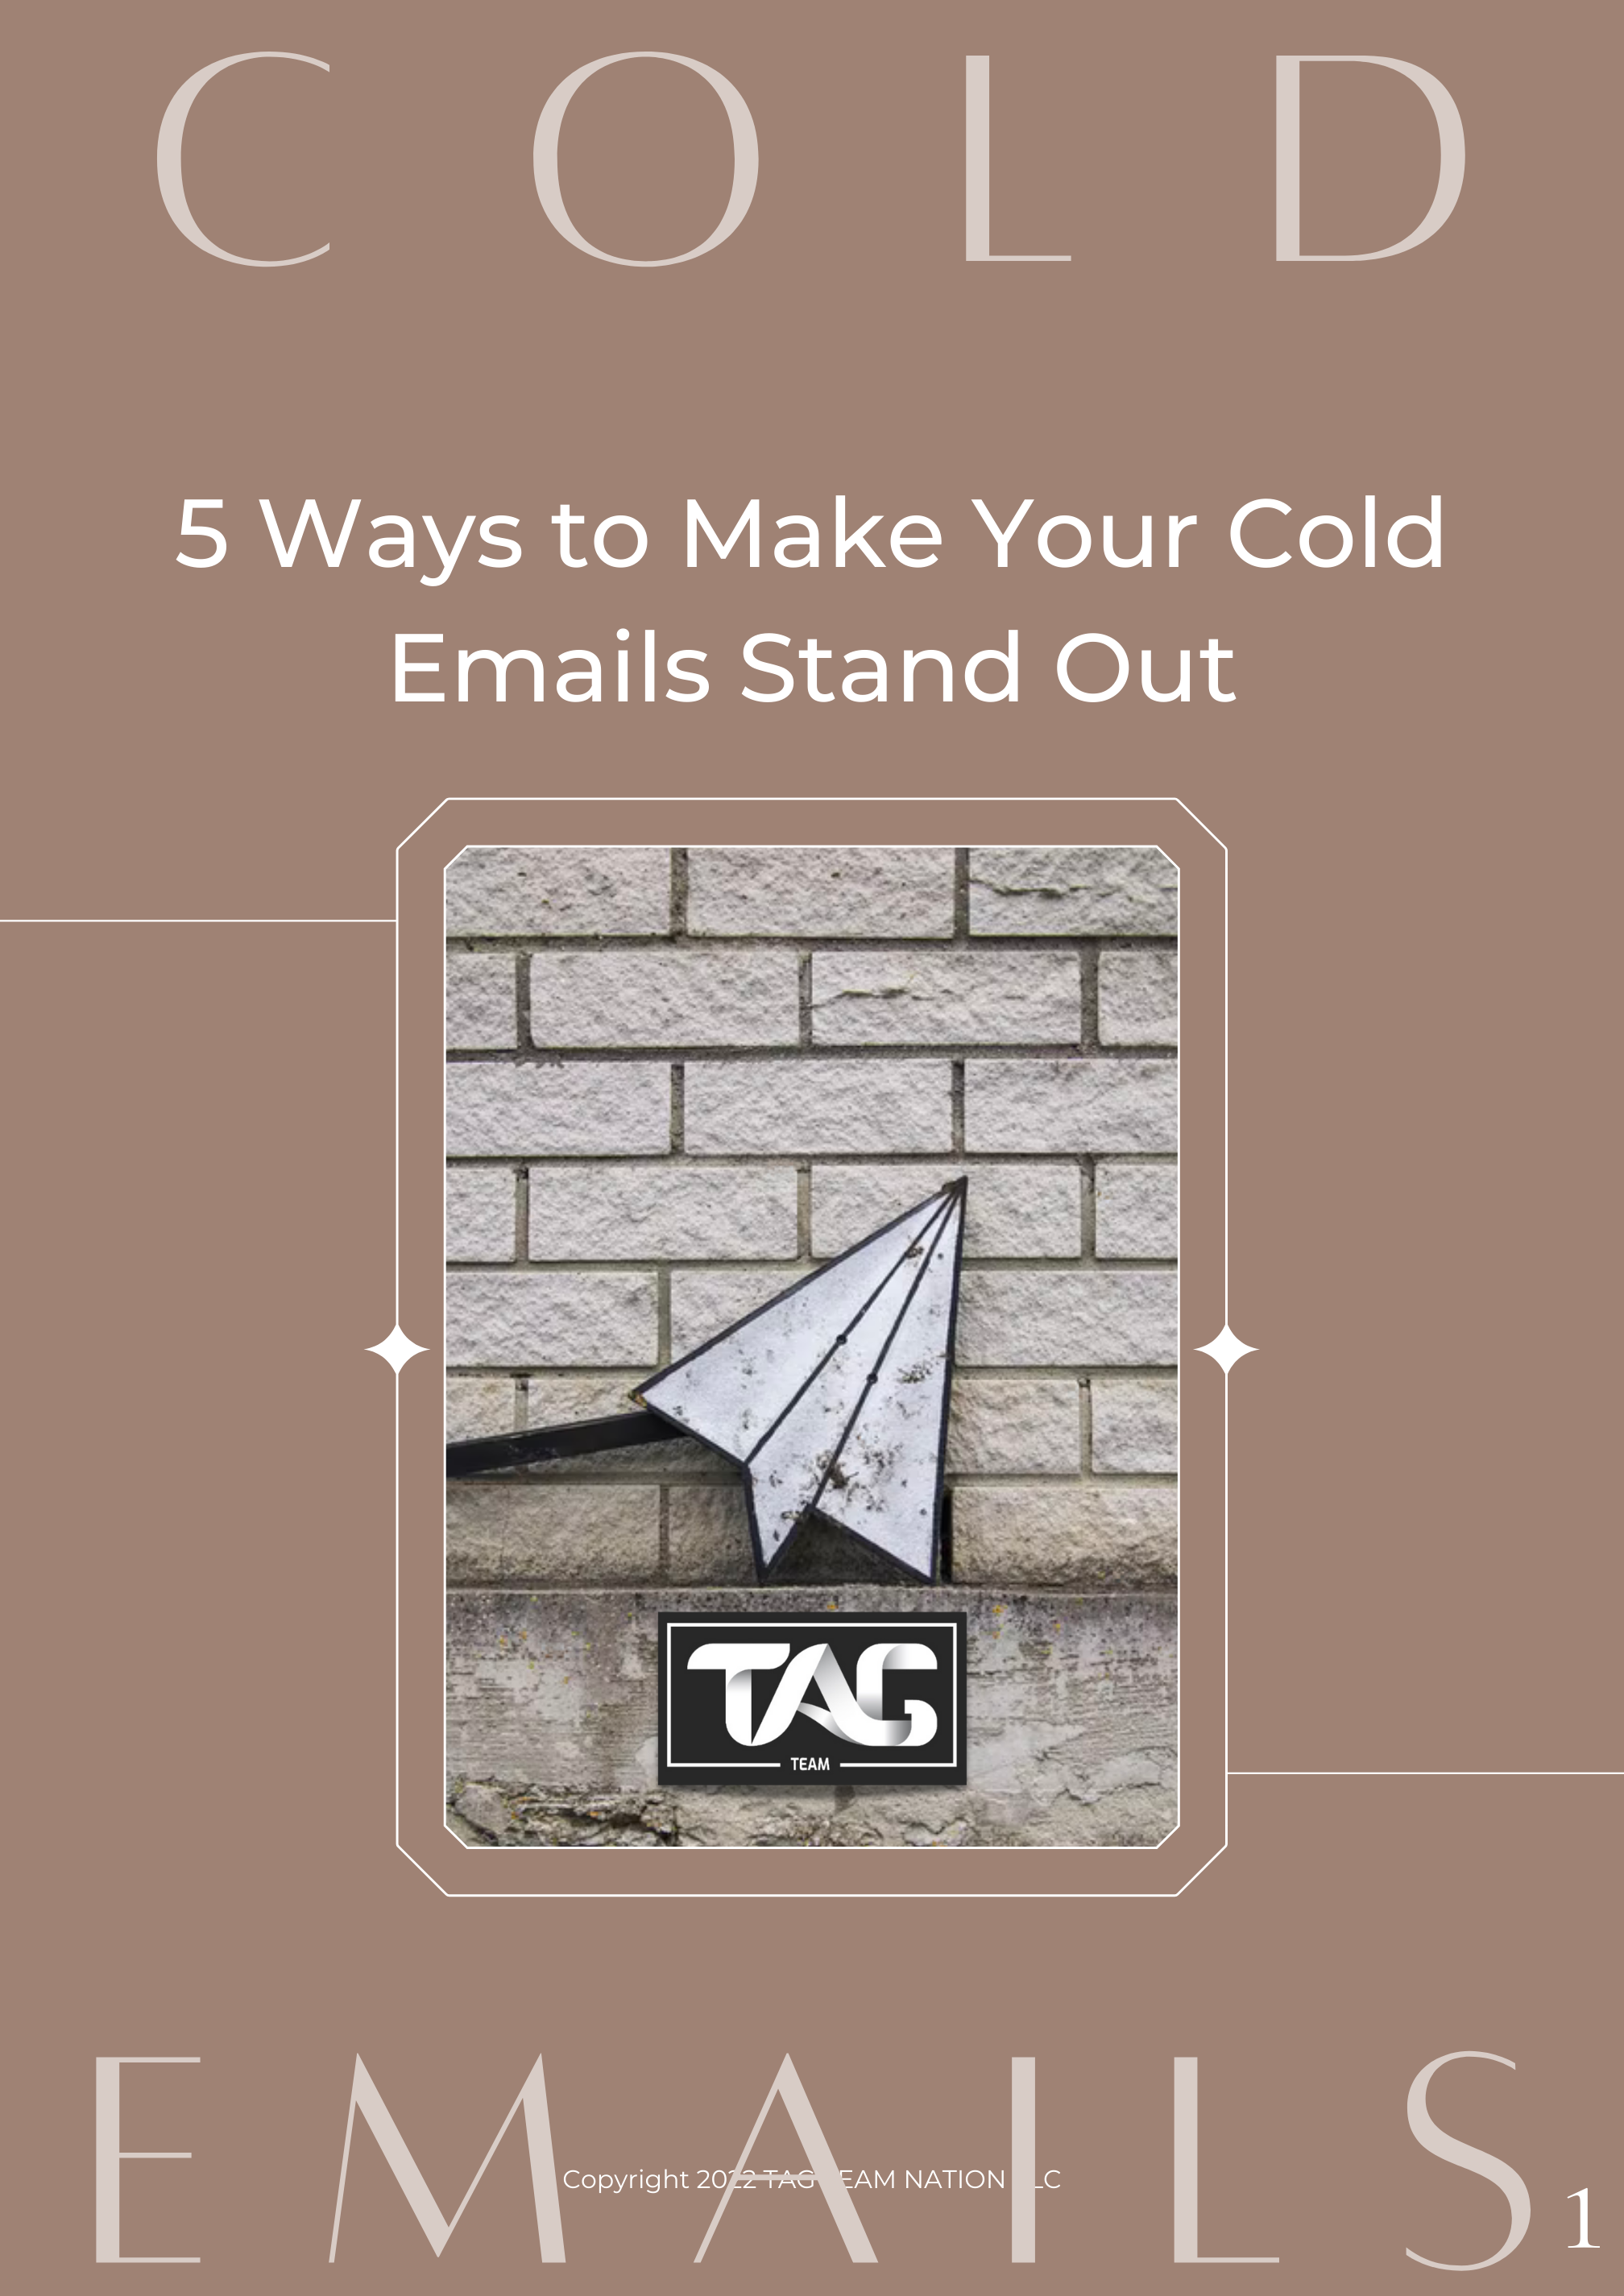 5 Ways to Make Your Cold Emails Stand Out